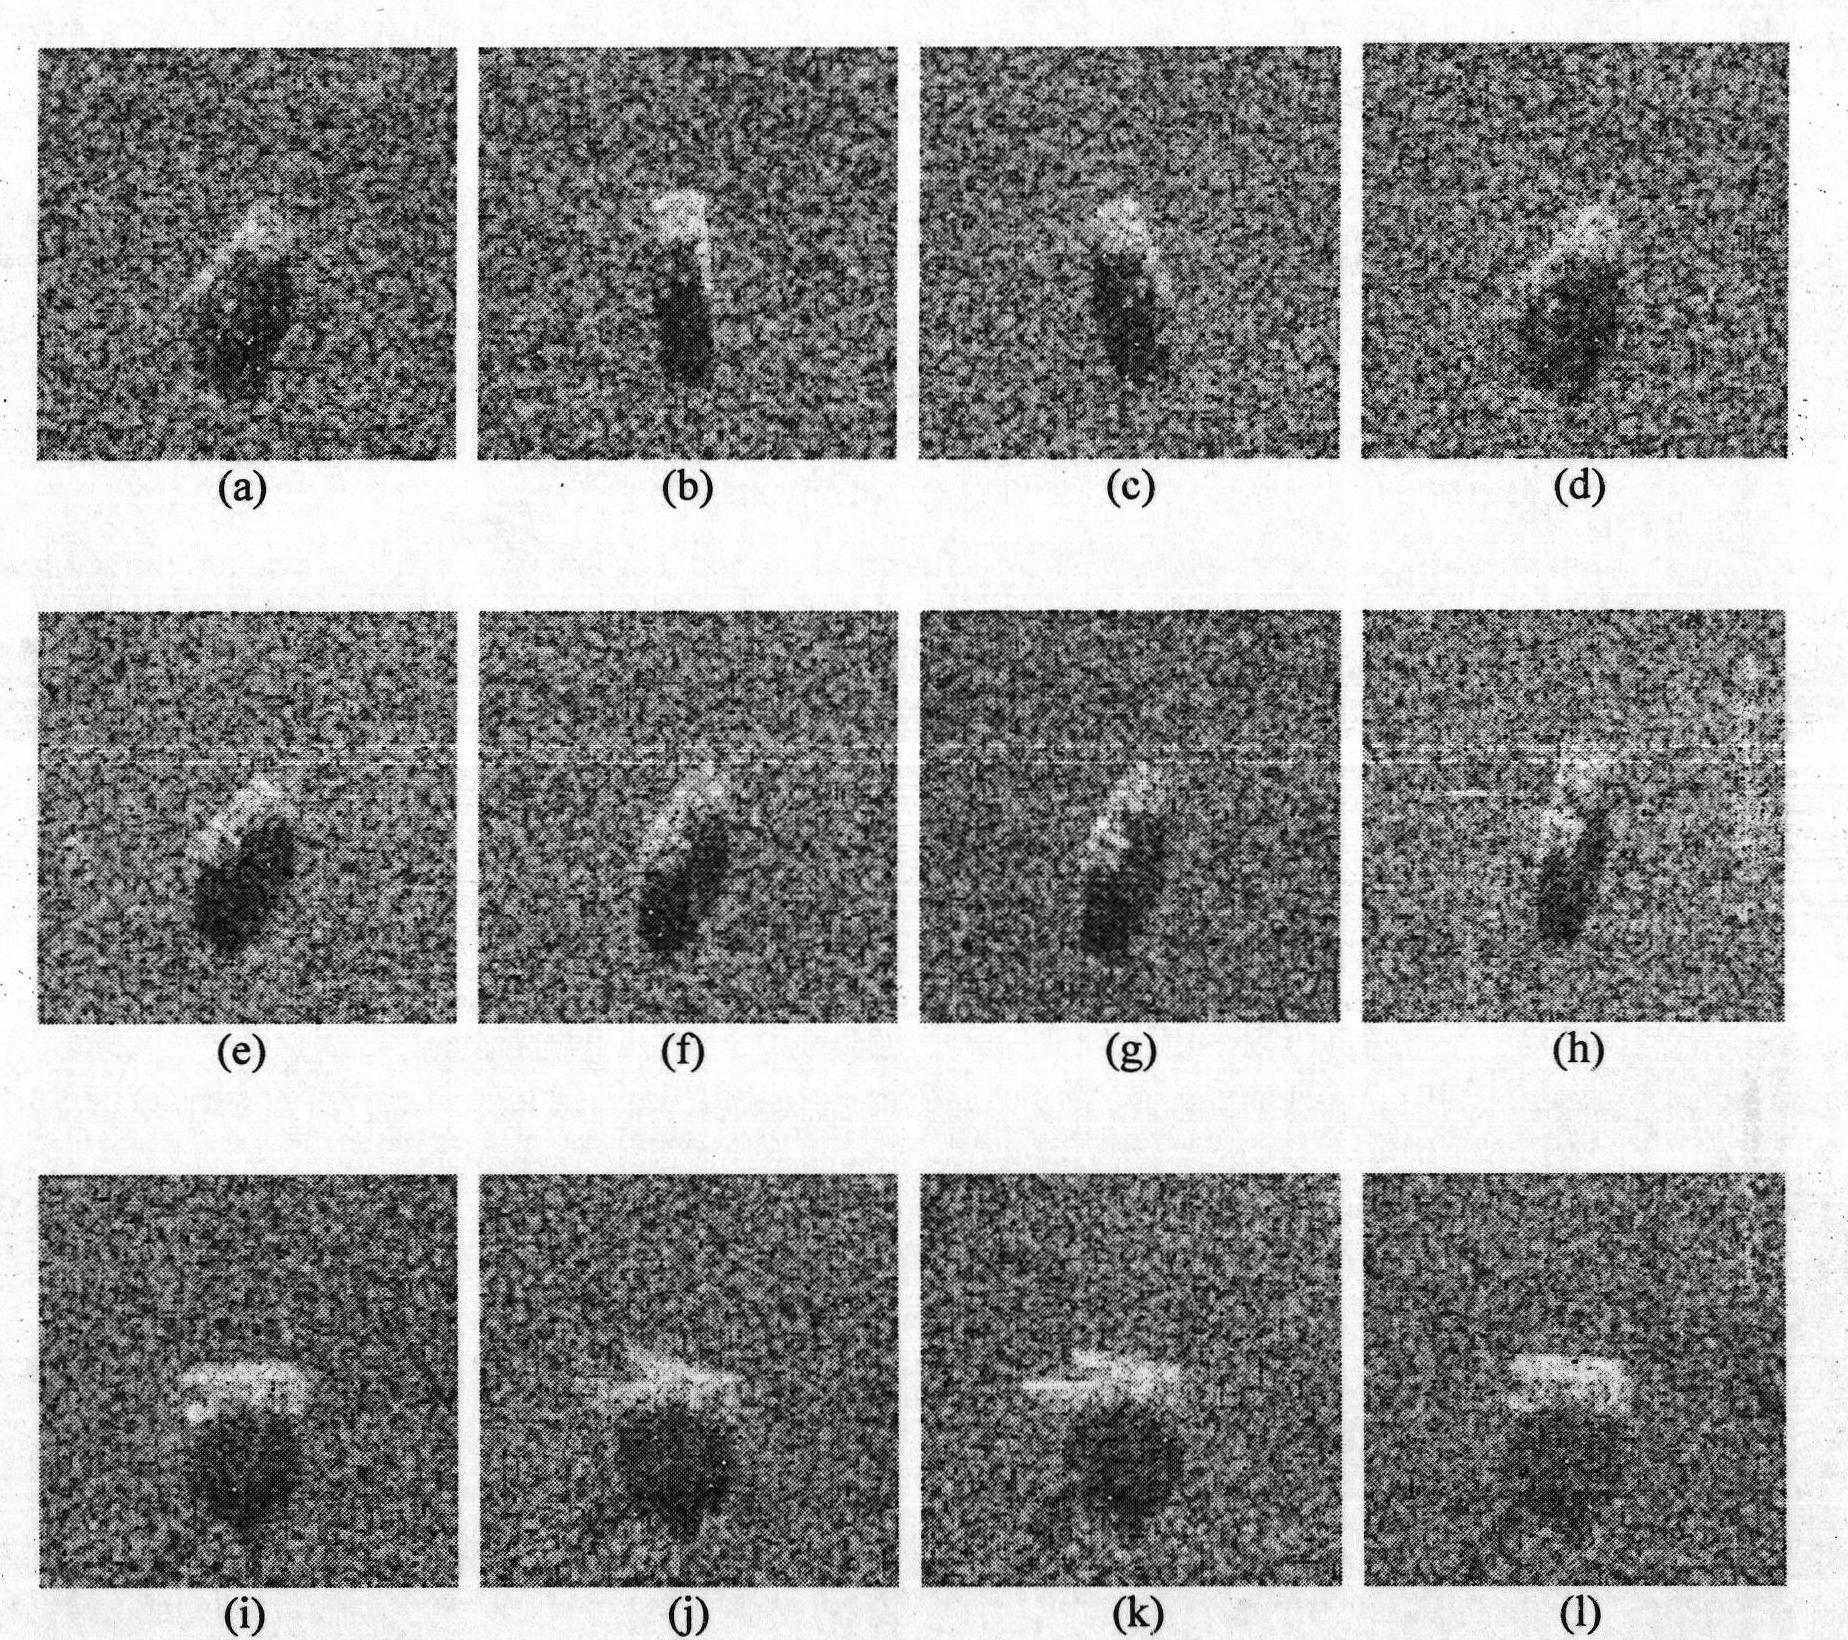 SAR (Synthetic Aperture Radar) image target recognizing method based on nuclear scale tangent dimensionality reduction